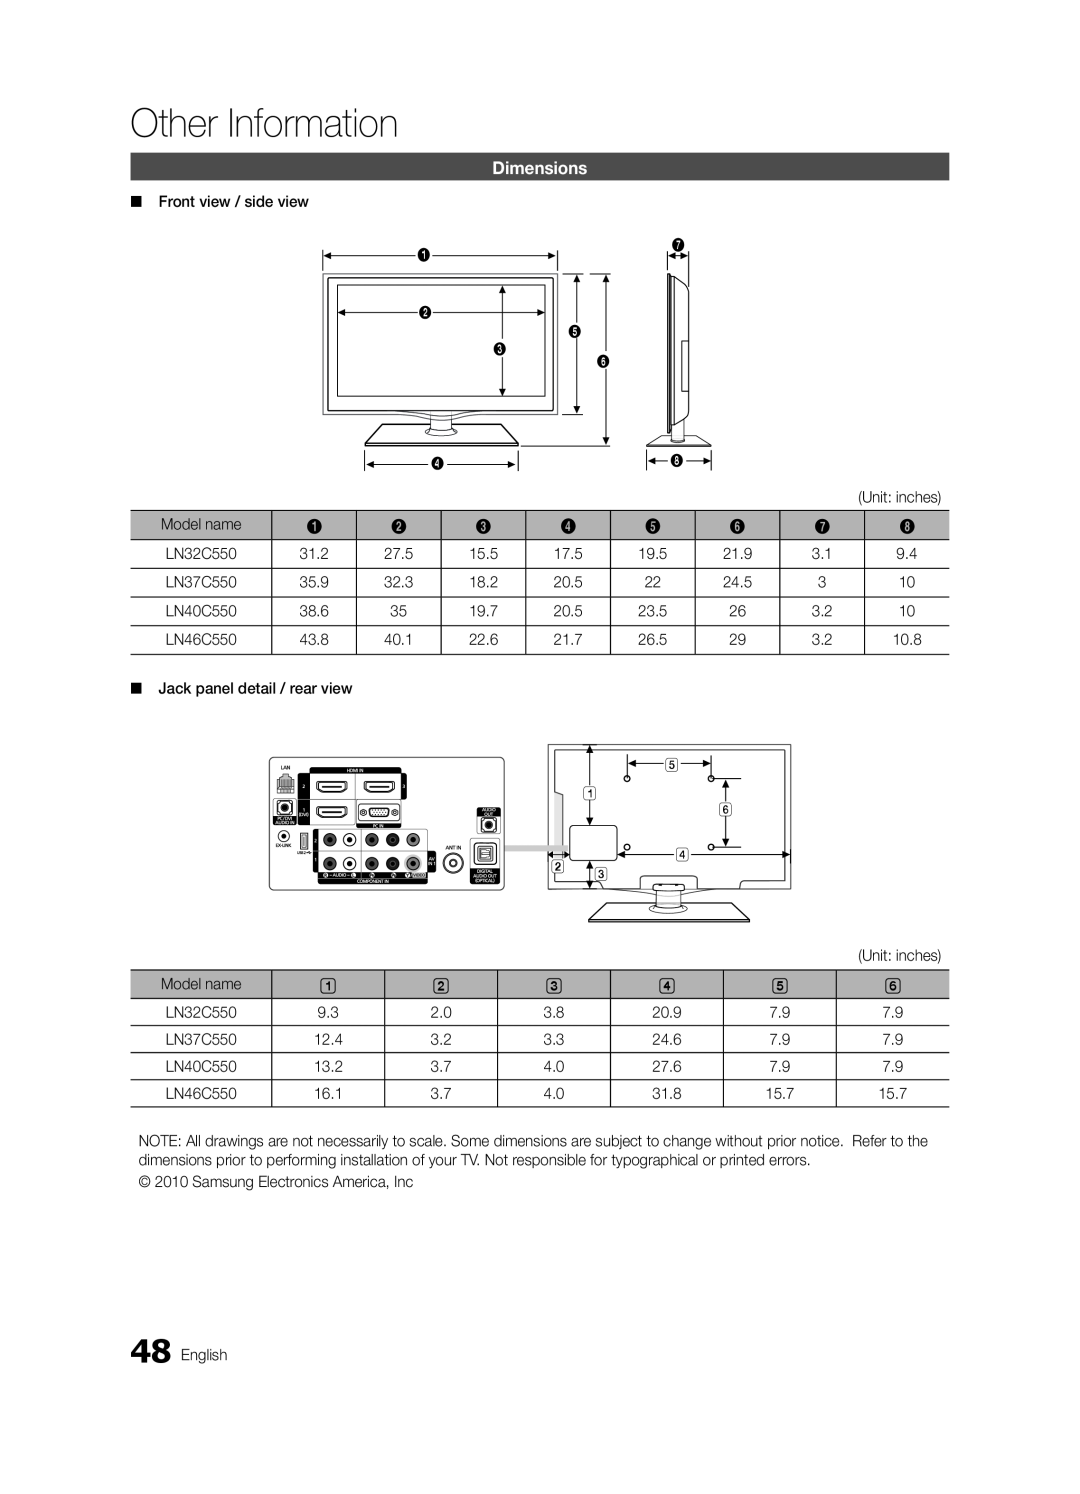 Samsung LN32C550 user manual Dimensions, Other Information 